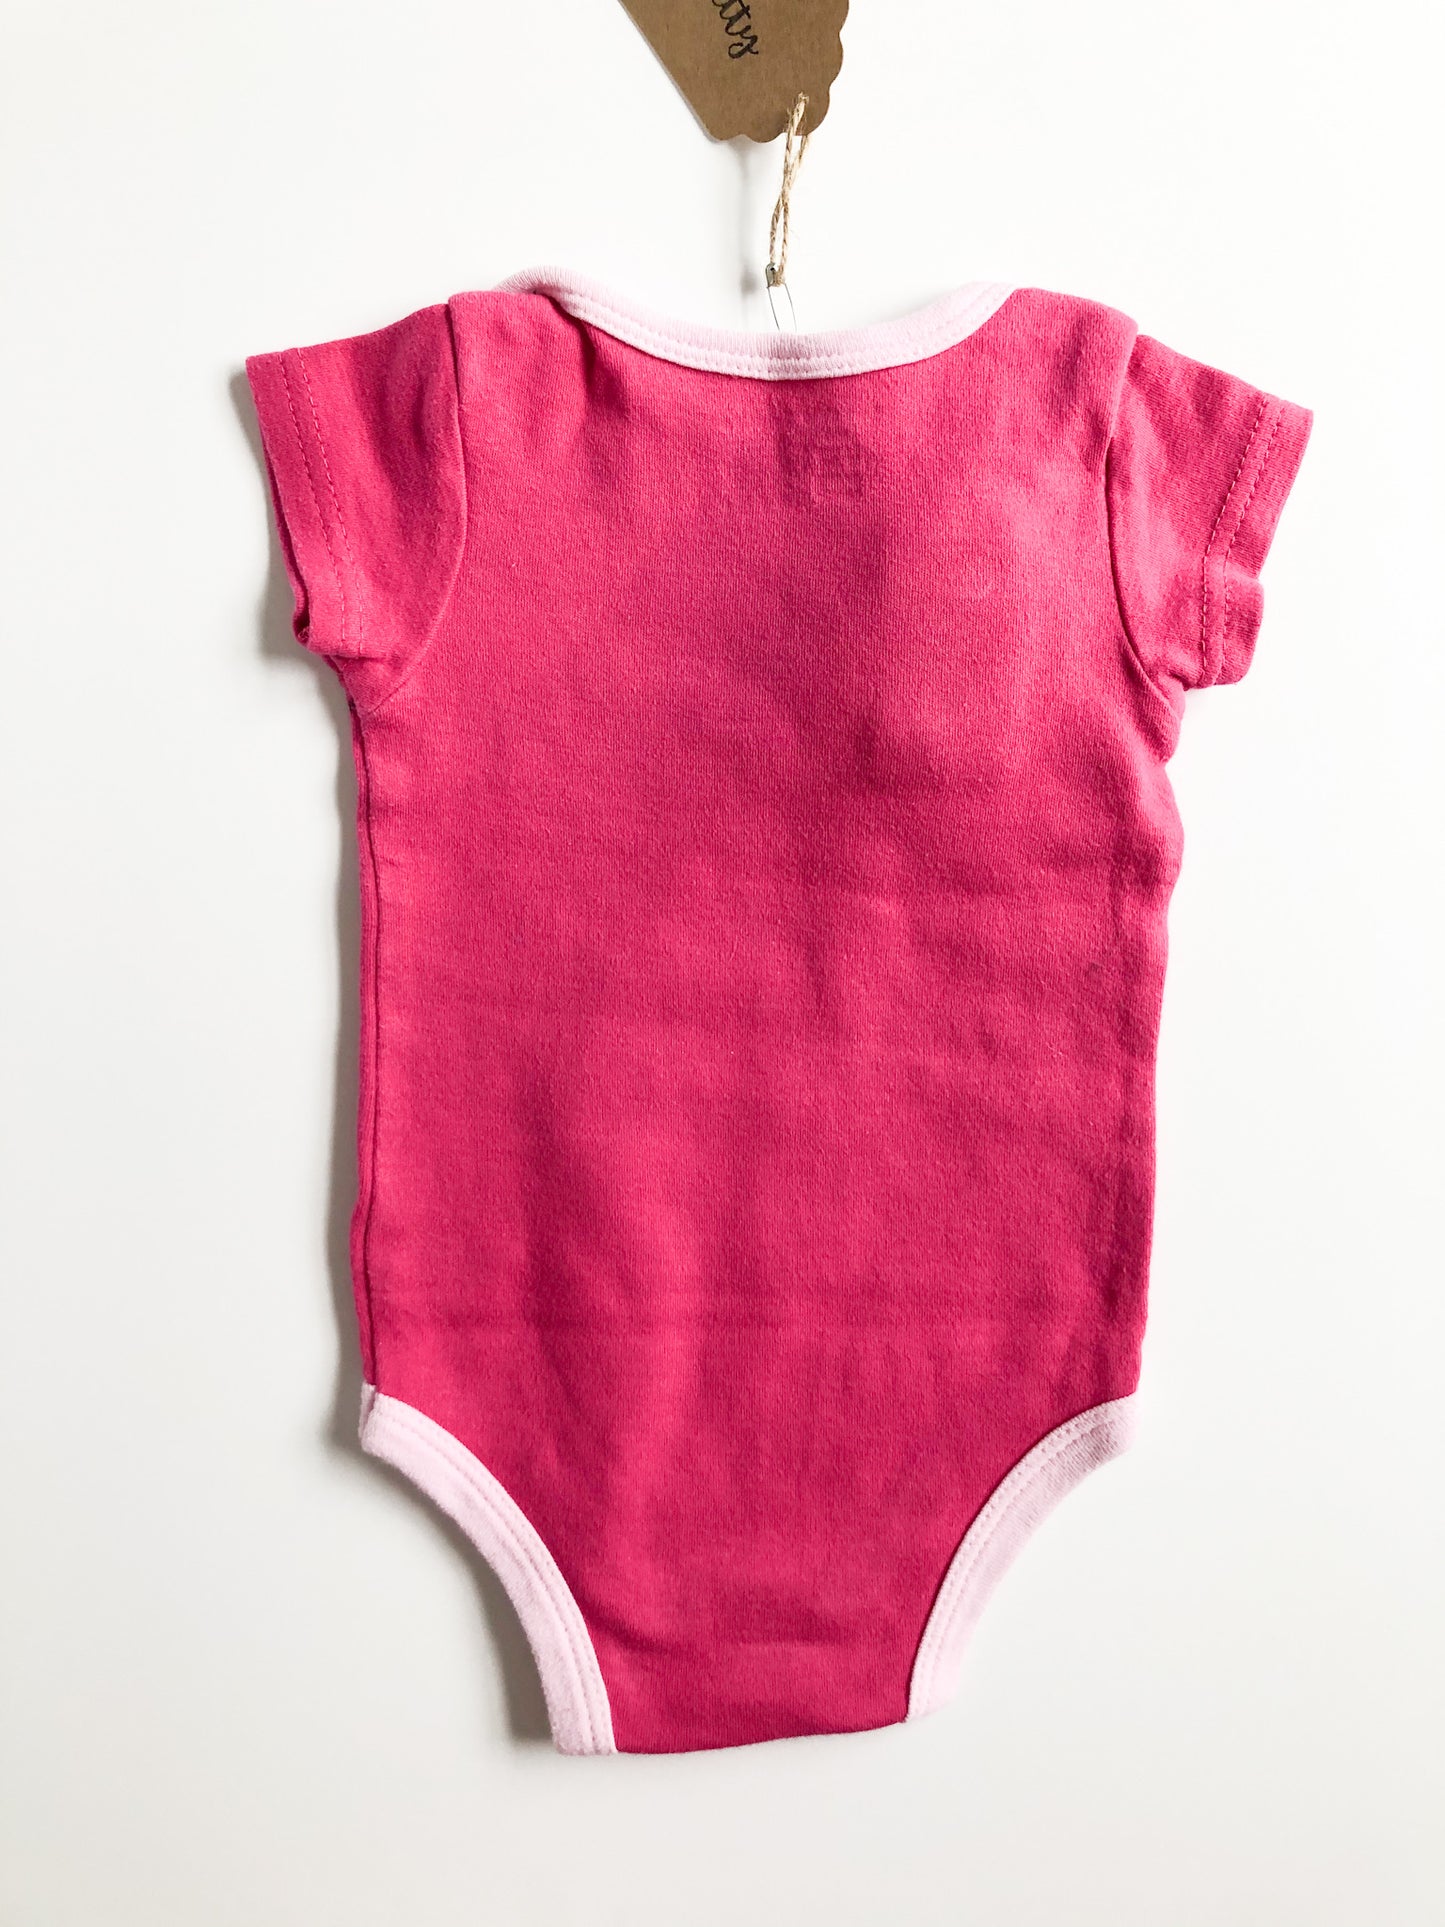 Pink 100% Cotton Upcycled Adorned Bodysuit by Eco Pretty - 3-6 Months - Le Prix Fashion & Consulting